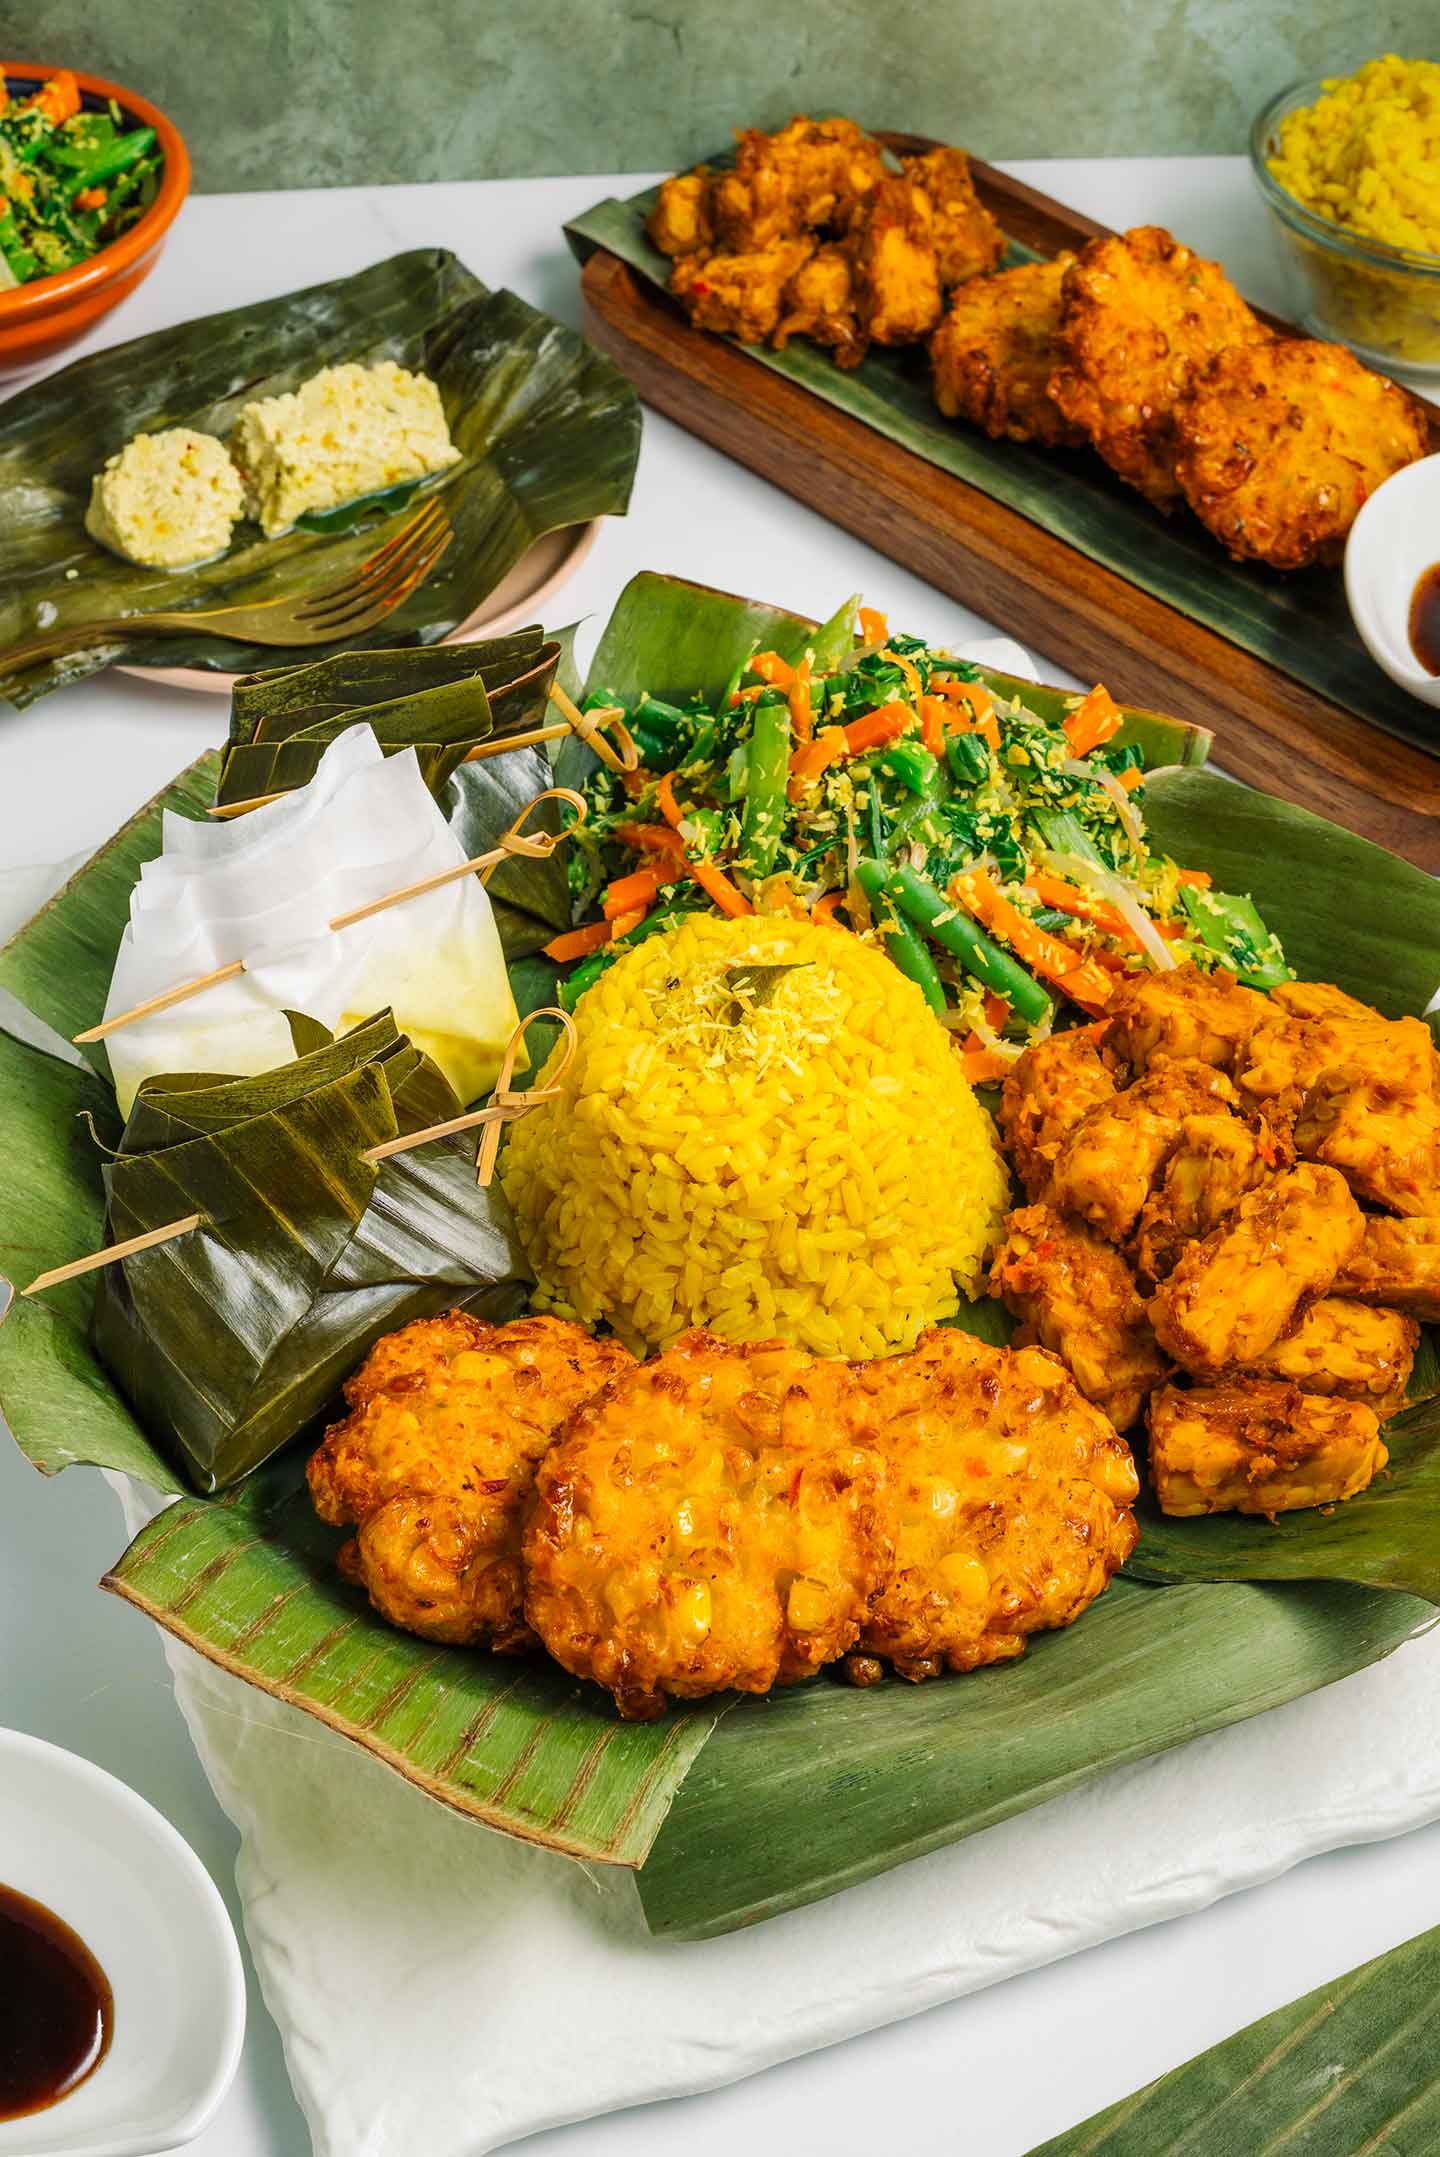 A tasting platter of Balinese food presented on banana leaves. A mound of turmeric rice sits in the centre with tofu pepes, urab coconut and vegetable salad, tempeh, and corn fritters surrounding.